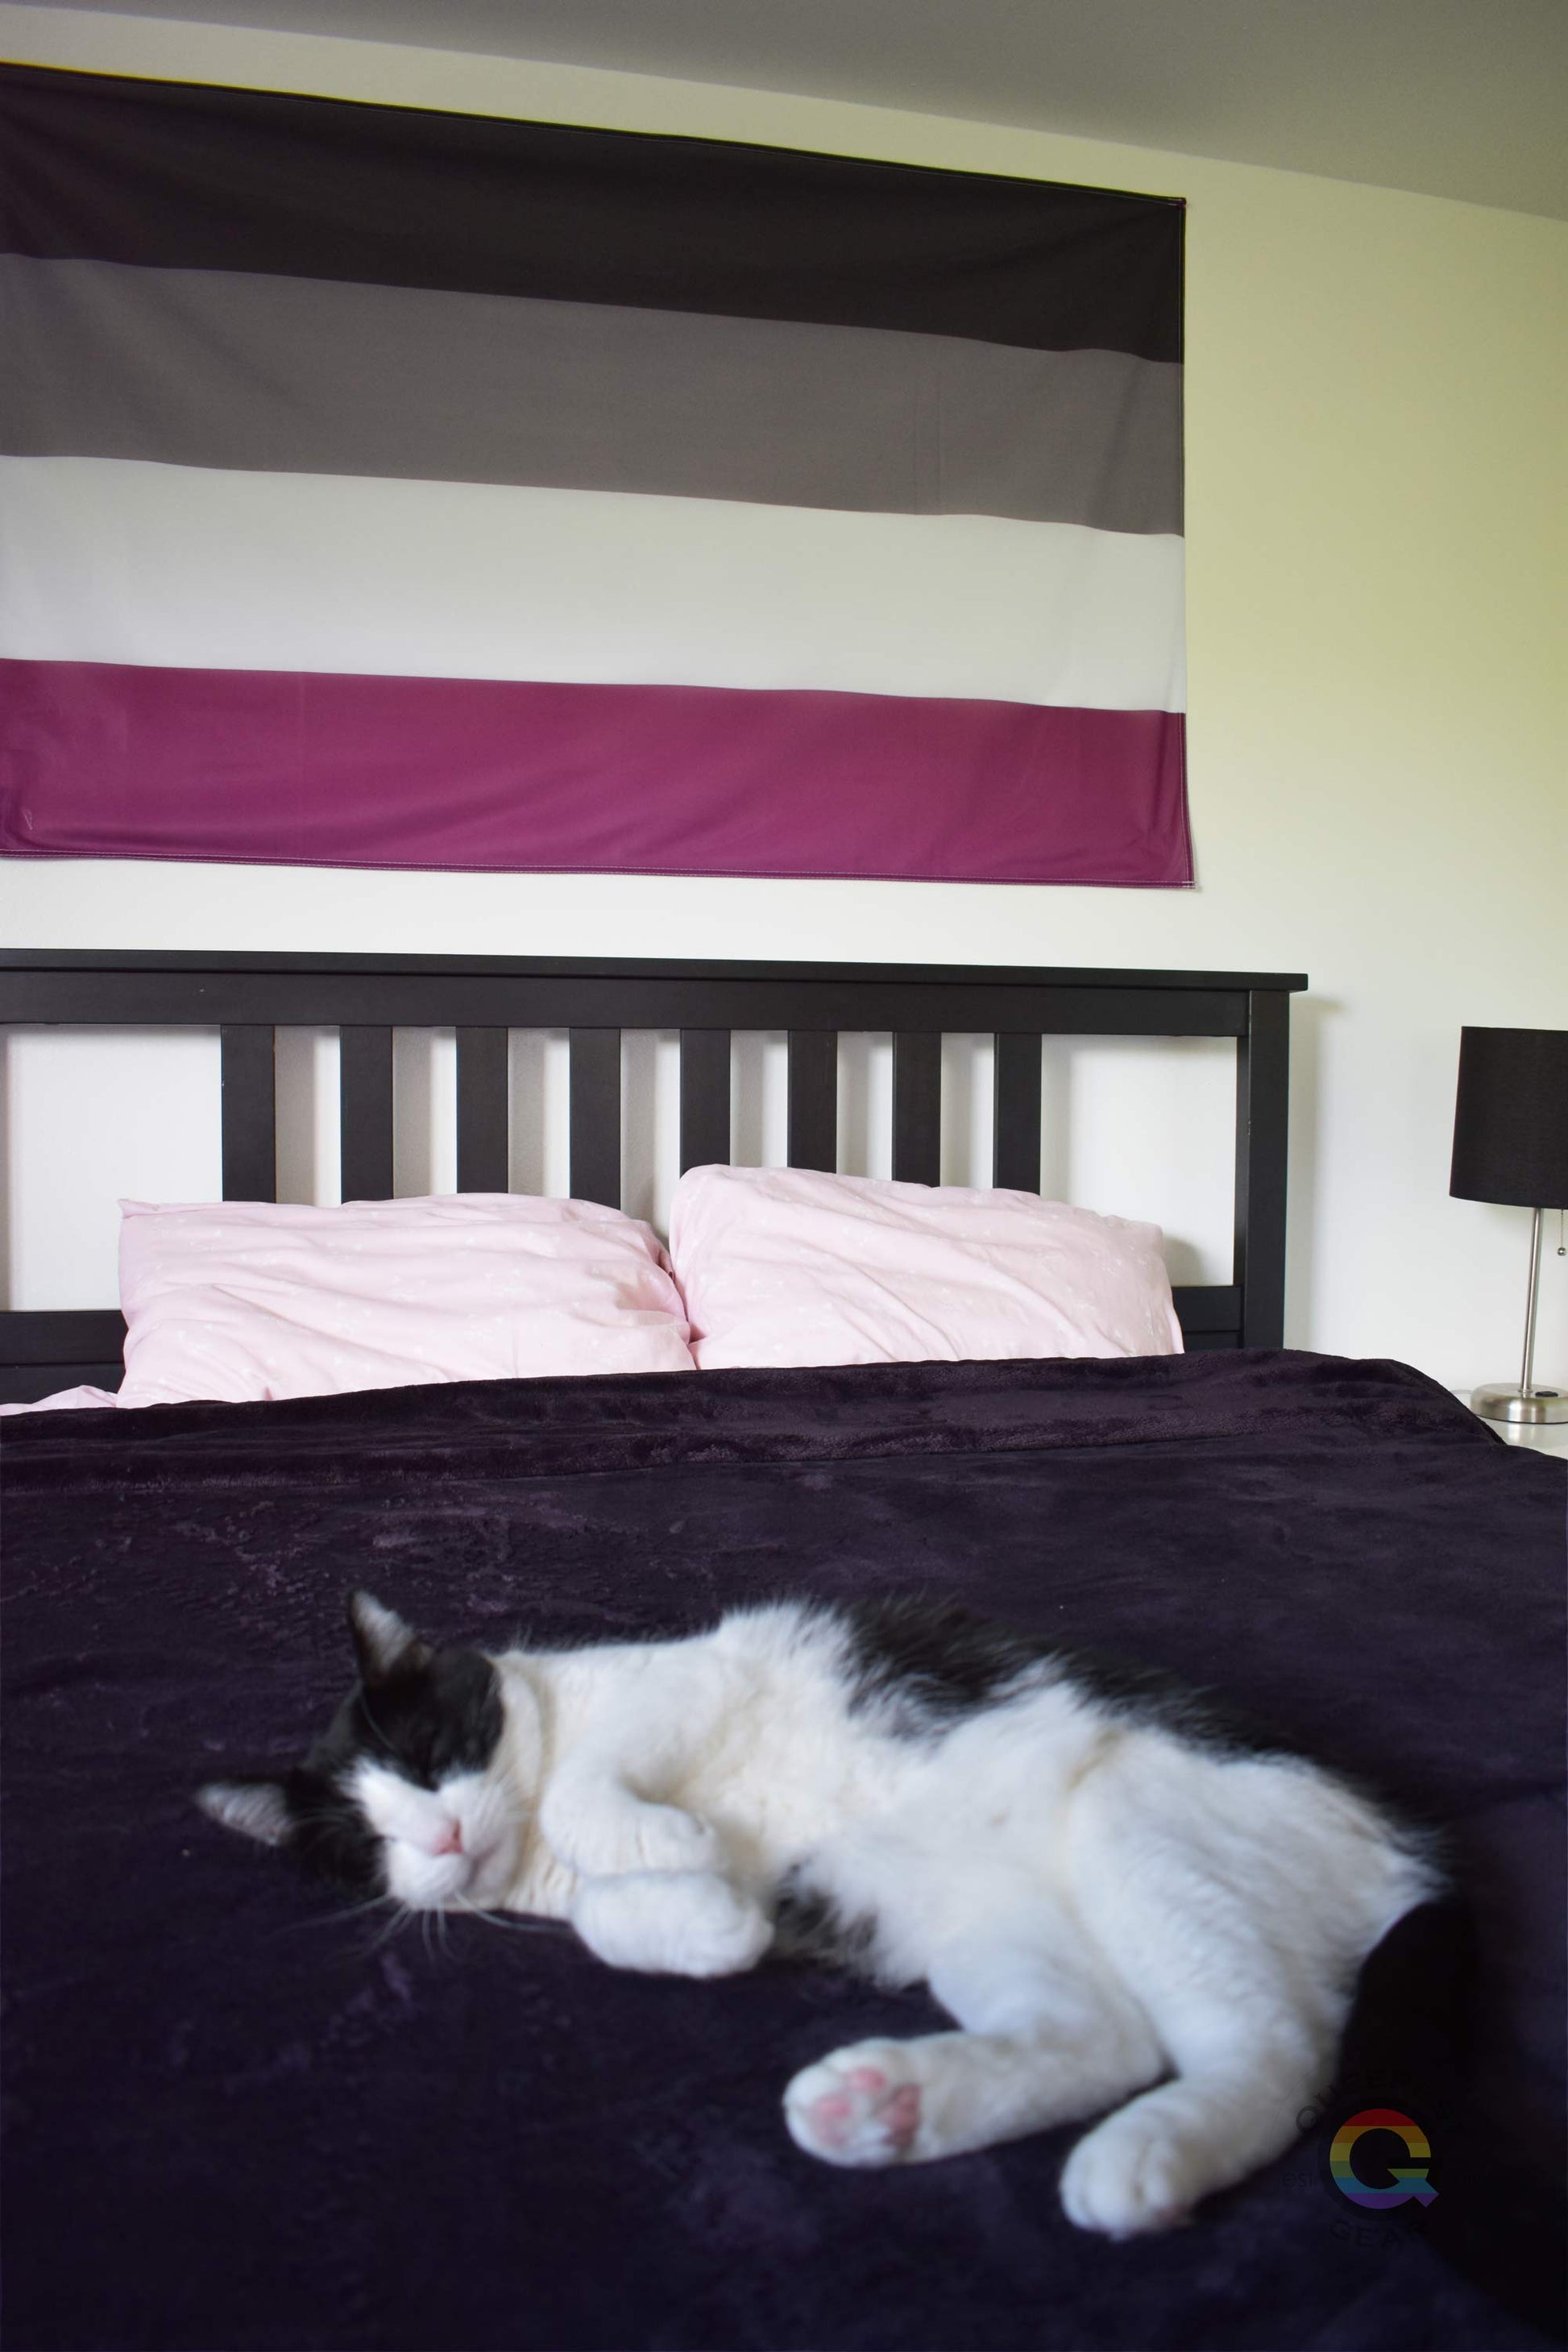 3’x5’ asexual pride flag hanging horizontally on the wall of a bedroom centered above a bed with a purple blanket. There is a black and white cat sleeping on the bed